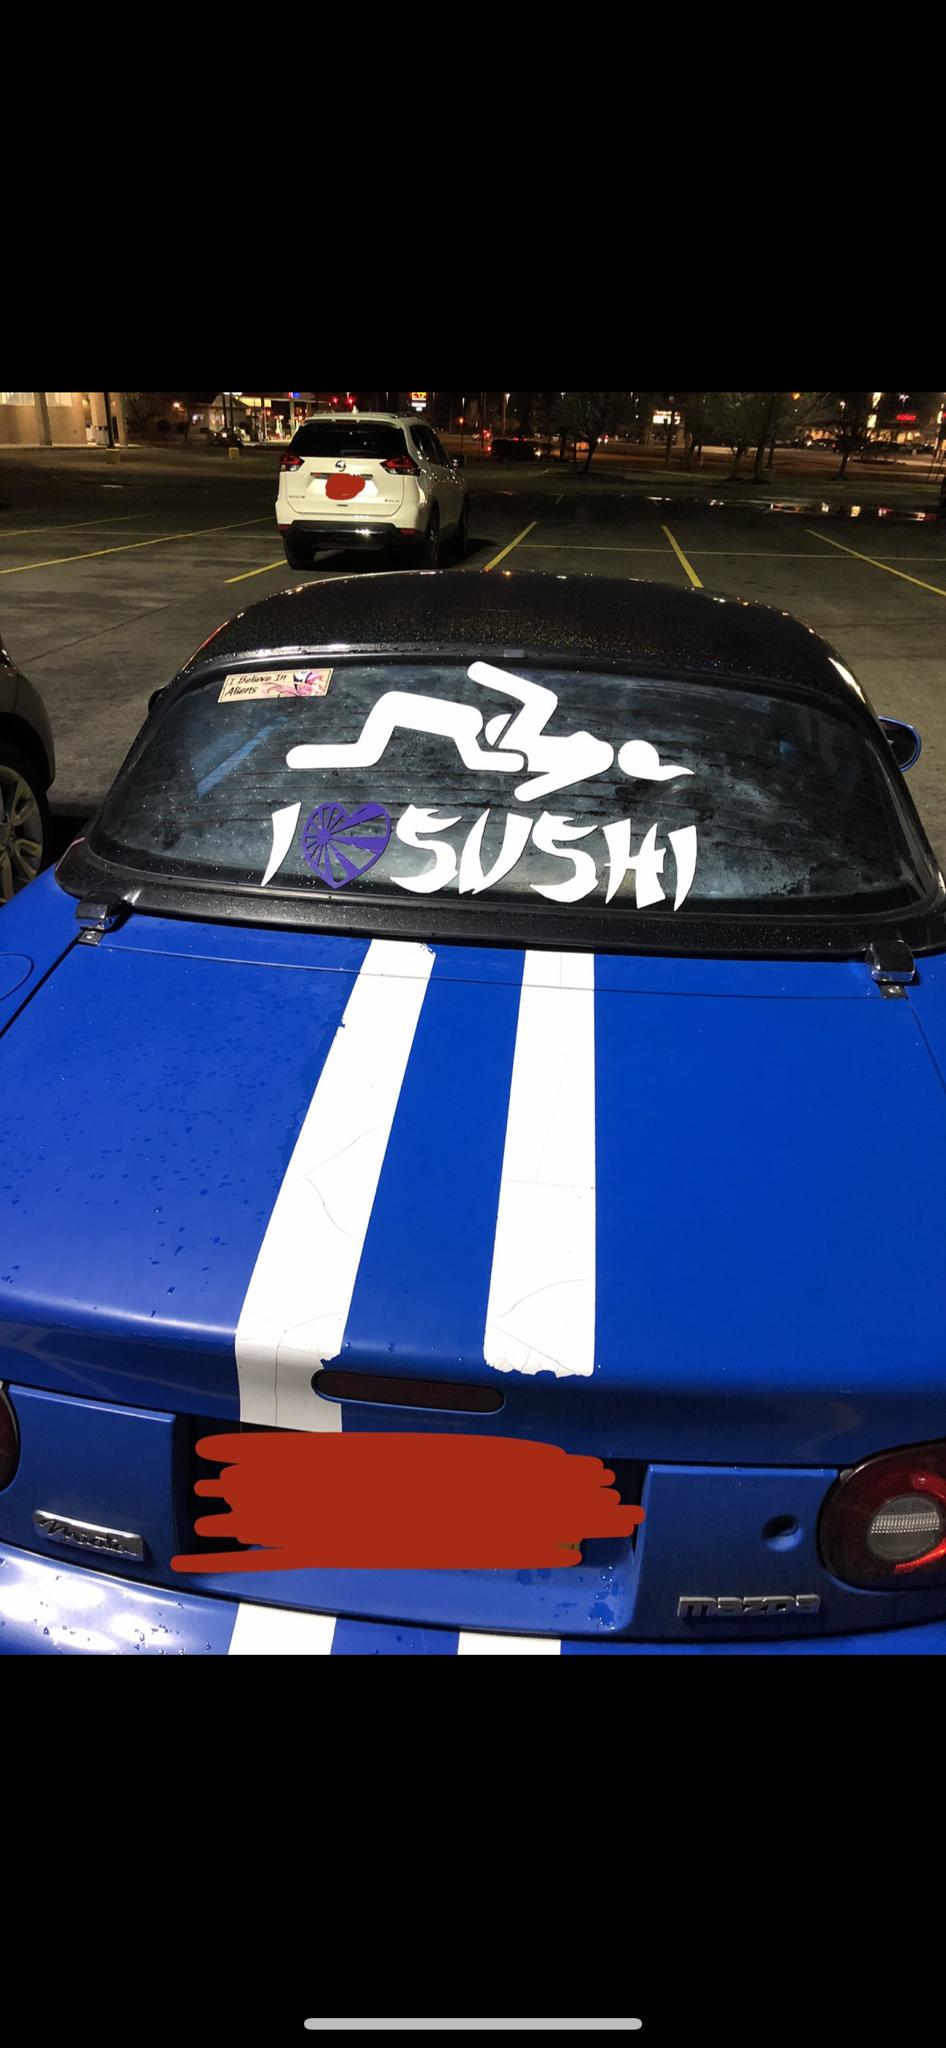 Suited oof to the particular particular person that has this car at a sushi restaurant I’m going to